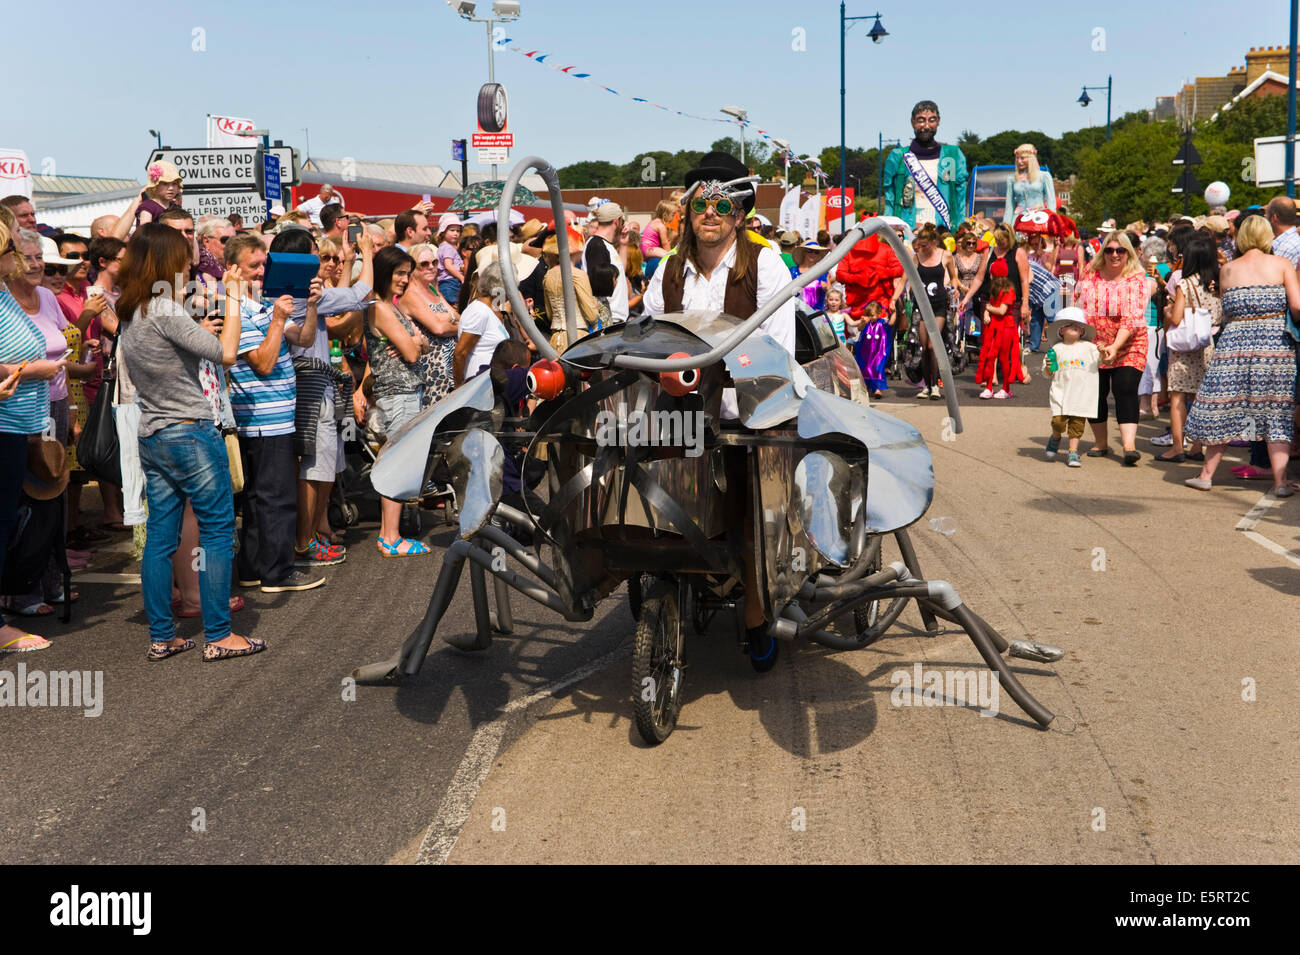 Carnival parade town centre during Whitstable Oyster Festival Kent England UK Stock Photo